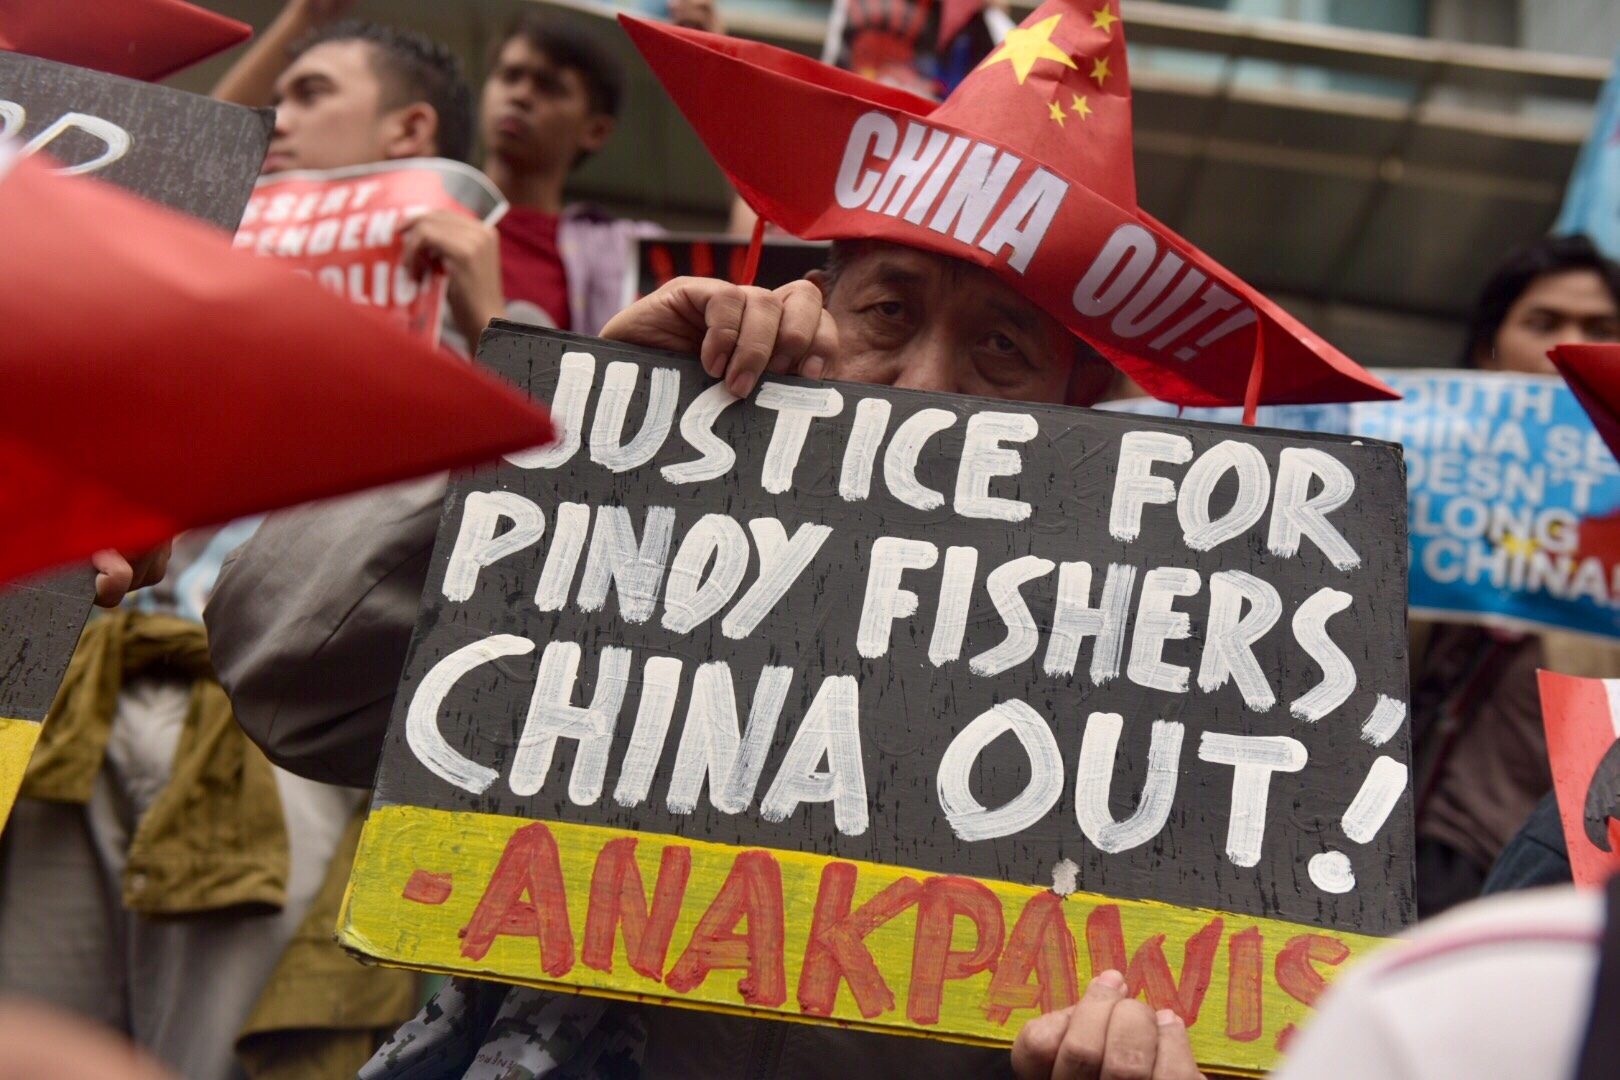 CHINA OUT! Militant groups call on China to leave the disputed territories in the West Philippine Sea. 